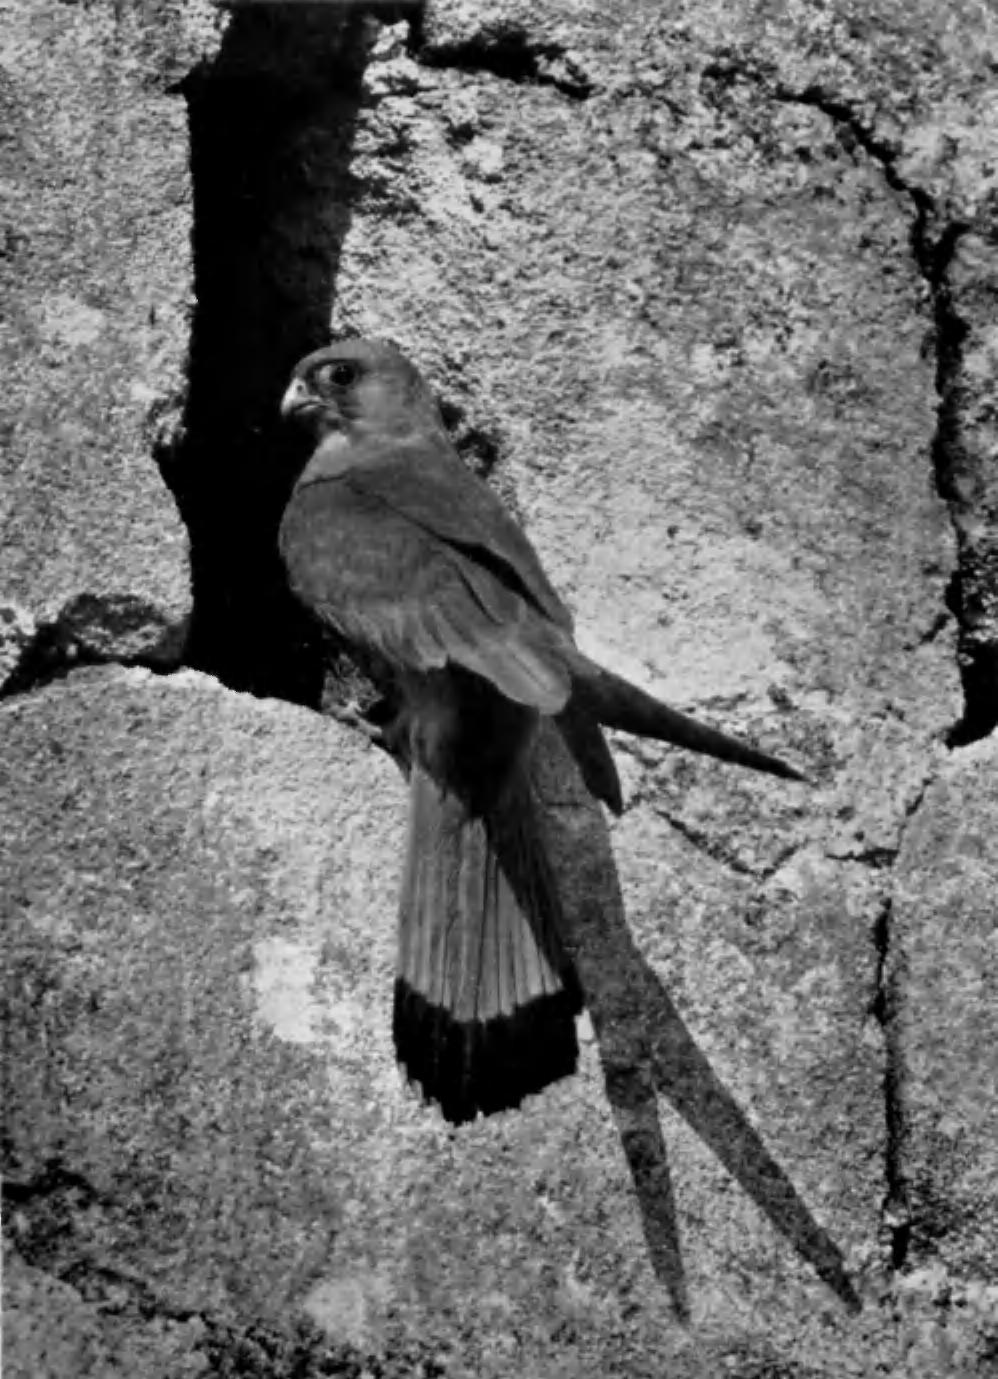 British Birds, Vol. xlvii, PI. 17. LESSER KESTREL (Falco naumanni). ADULT MALE AT ENTRANCE TO NEST. L'ABBAYE DE MONTMAJOUR, NEAR ARLES, FRANCE. MAY, 1953. (Photographed by C. C. DONCASTER).